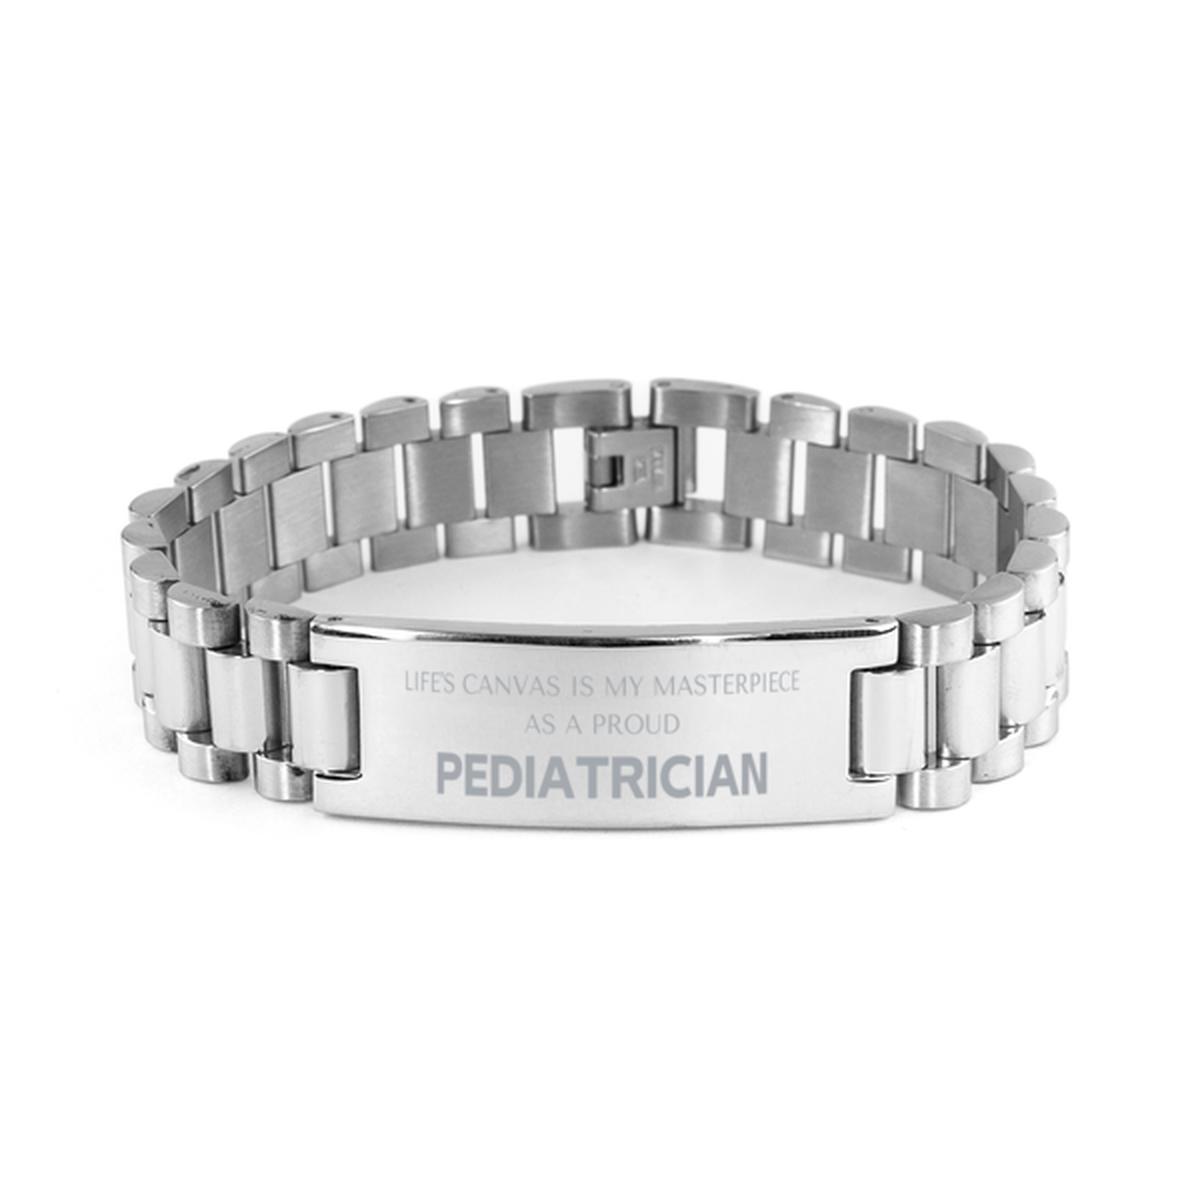 Proud Pediatrician Gifts, Life's canvas is my masterpiece, Epic Birthday Christmas Unique Ladder Stainless Steel Bracelet For Pediatrician, Coworkers, Men, Women, Friends